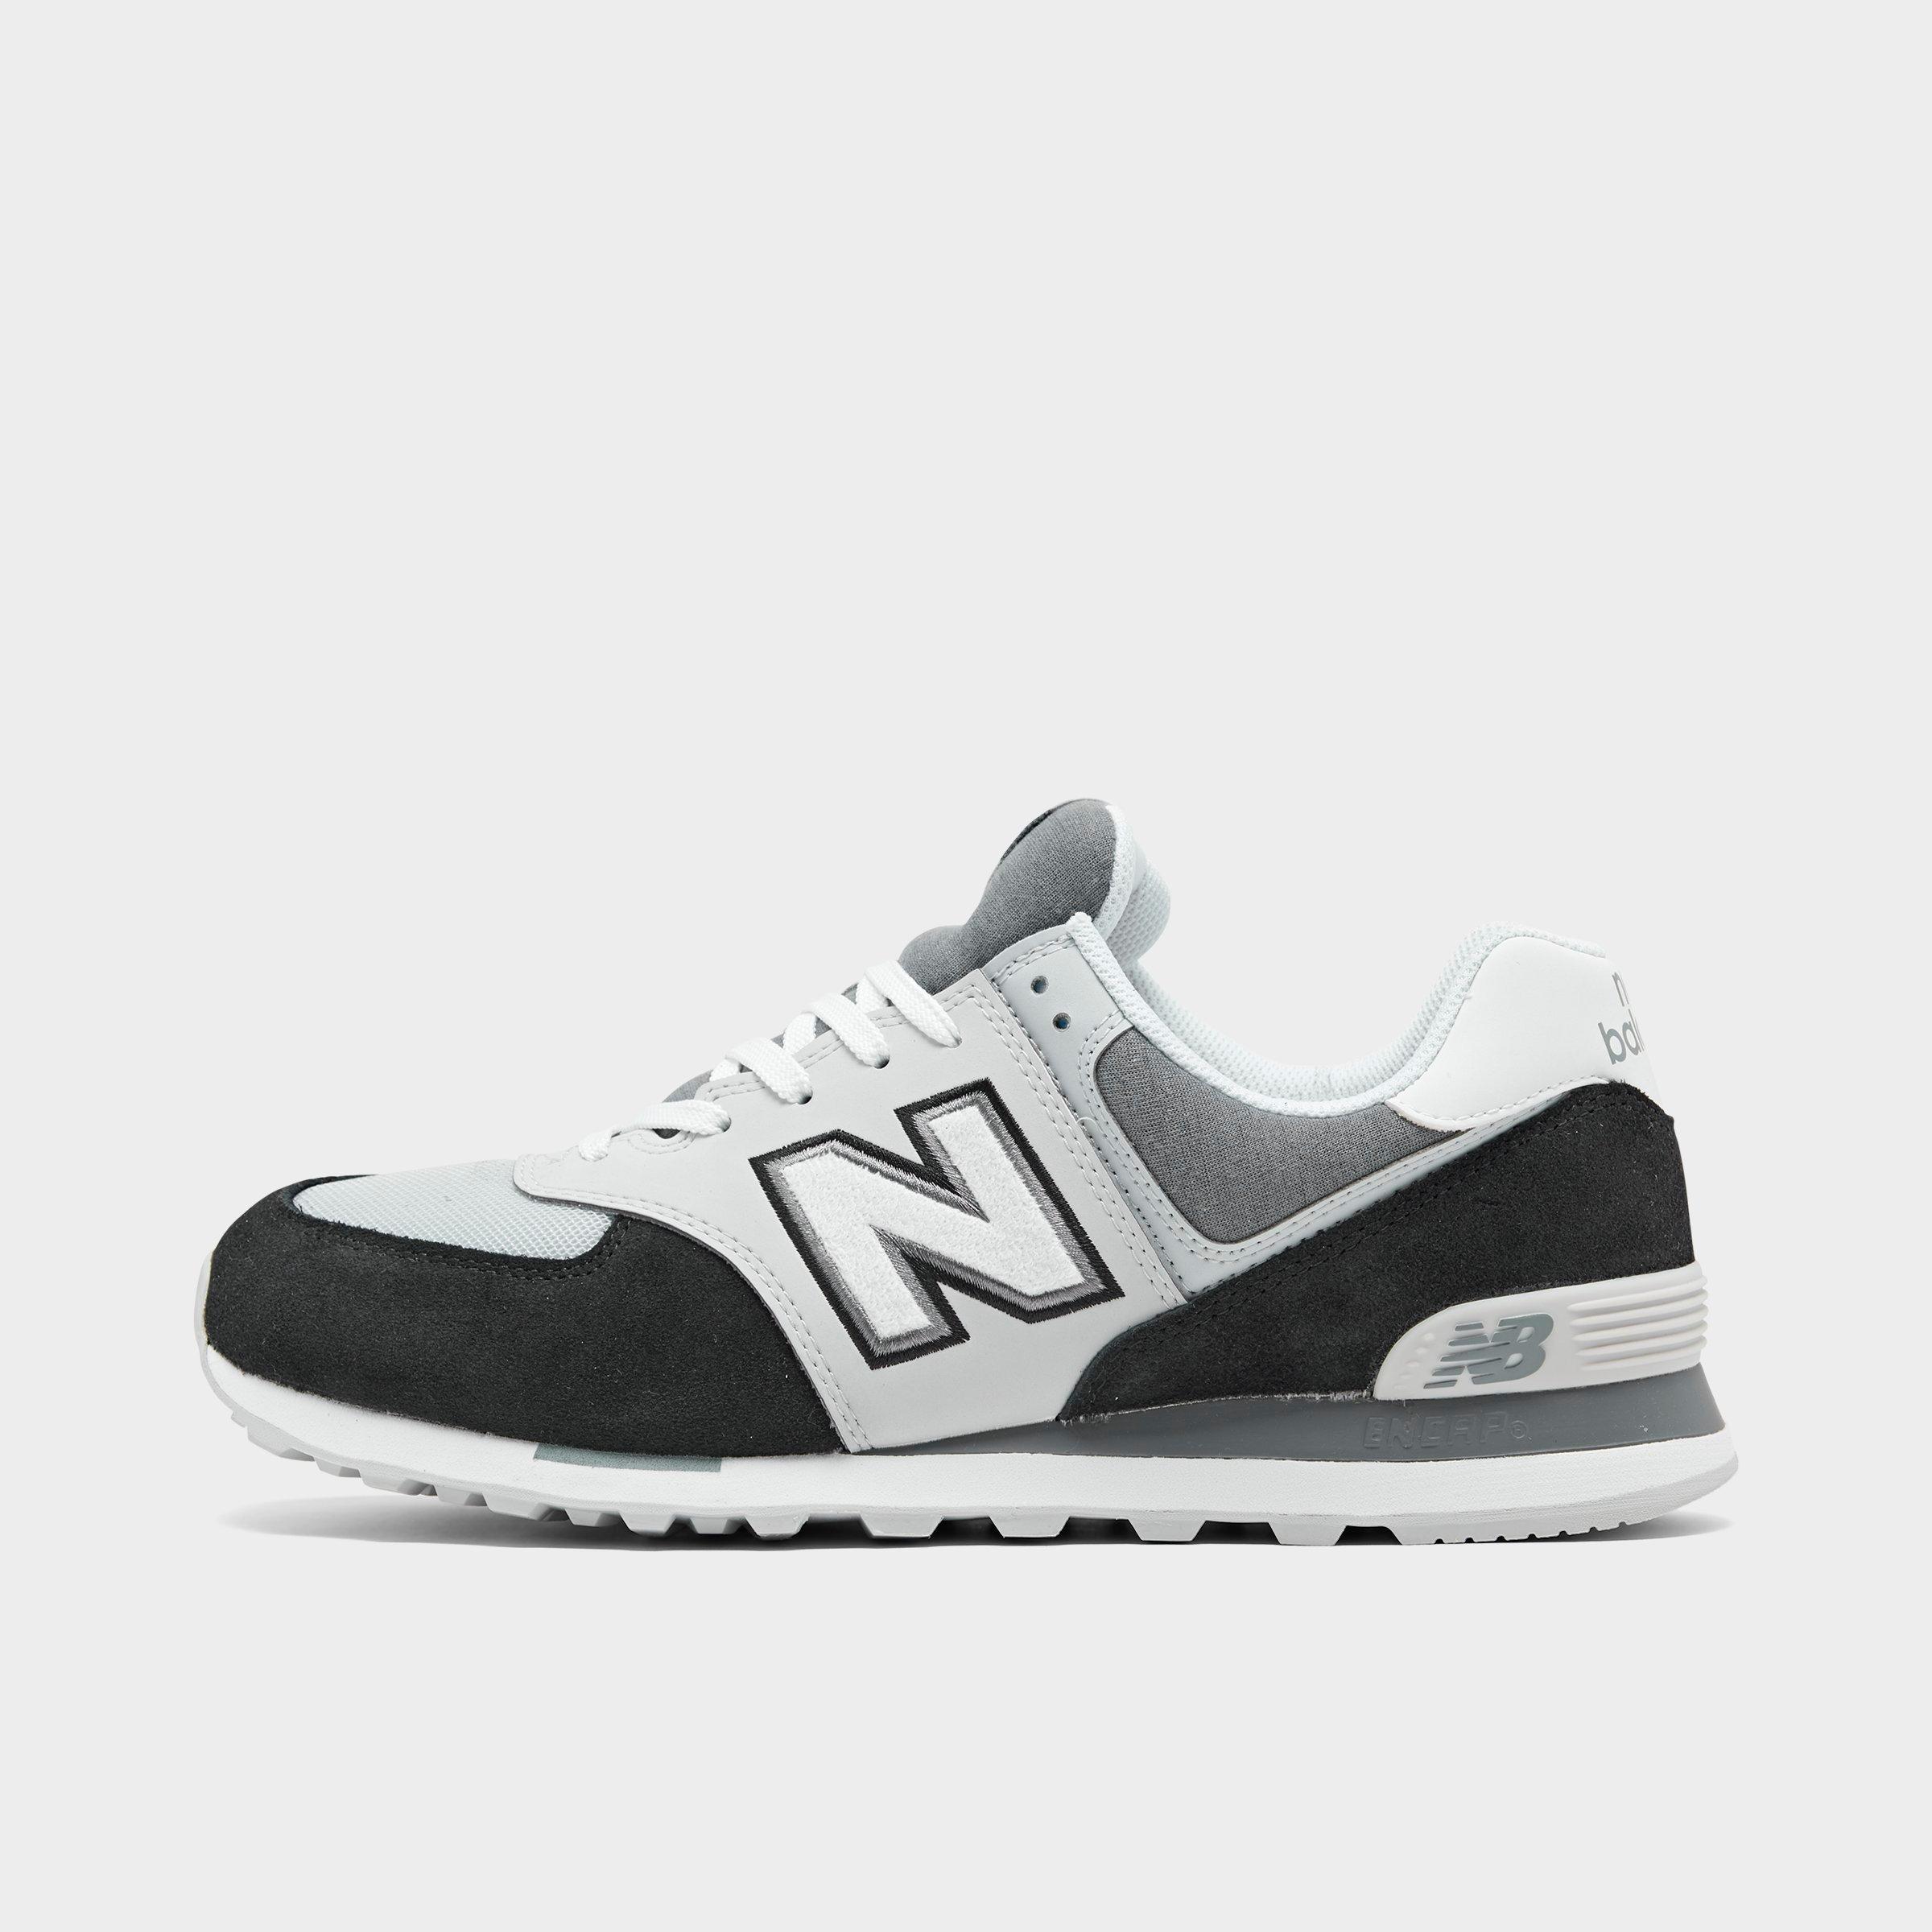 new balance men's 574 fresh foam casual sneakers from finish line